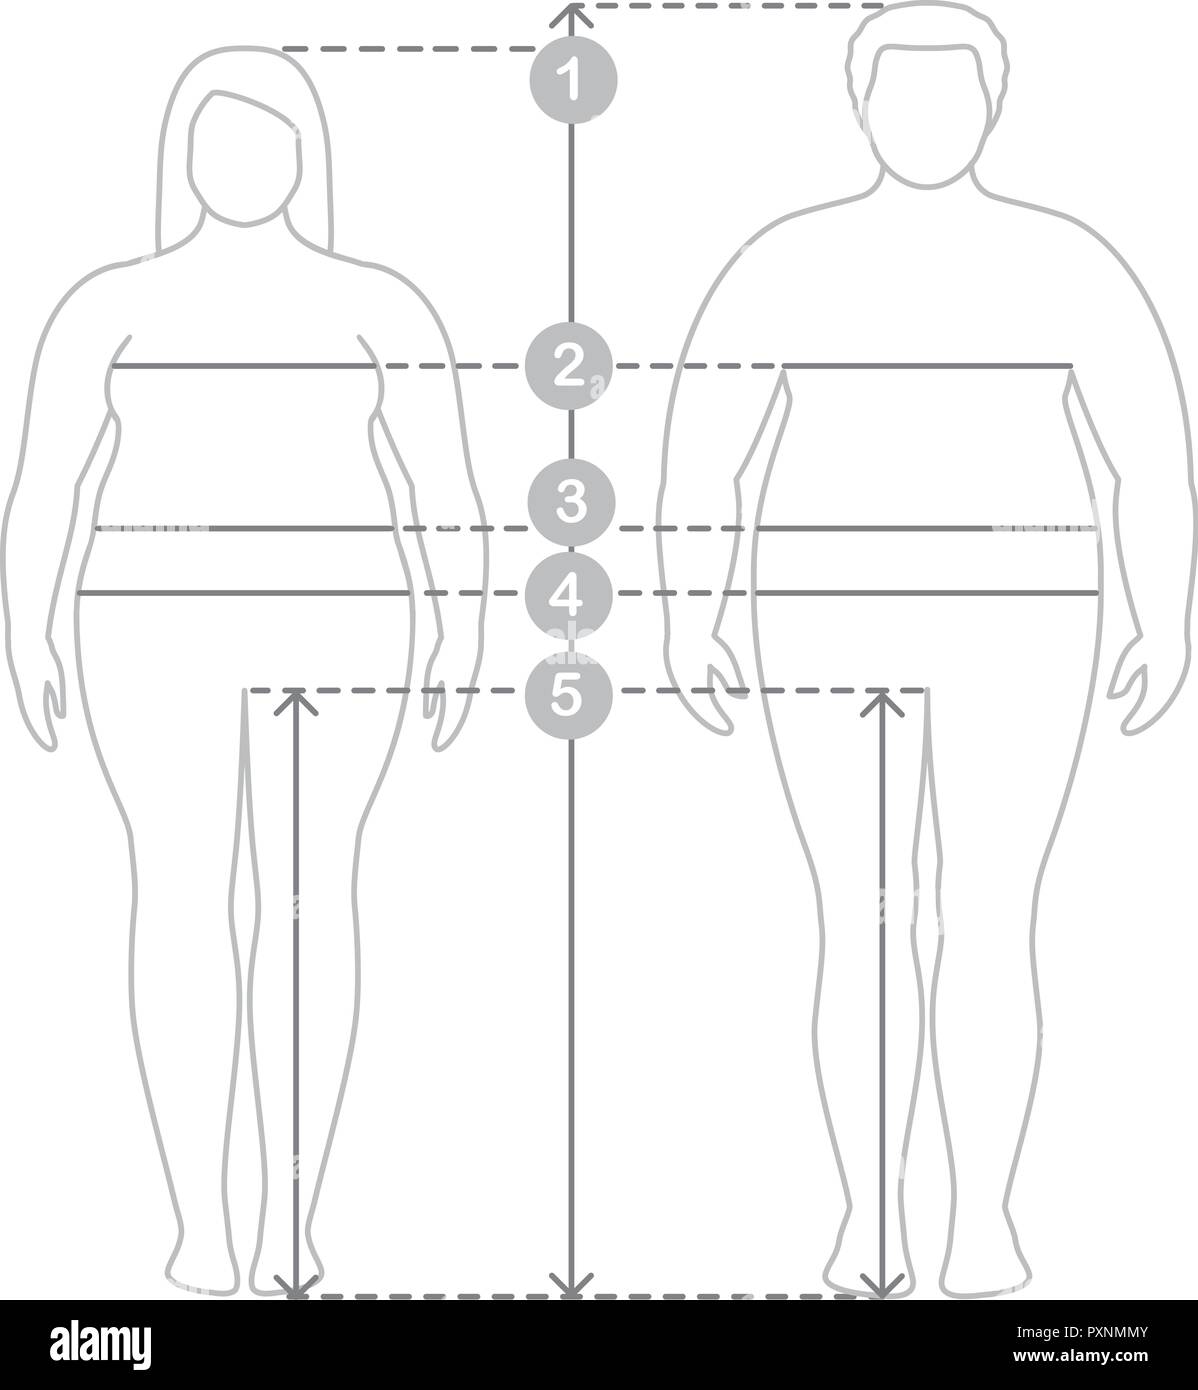 Contours of overweight man and women in ...